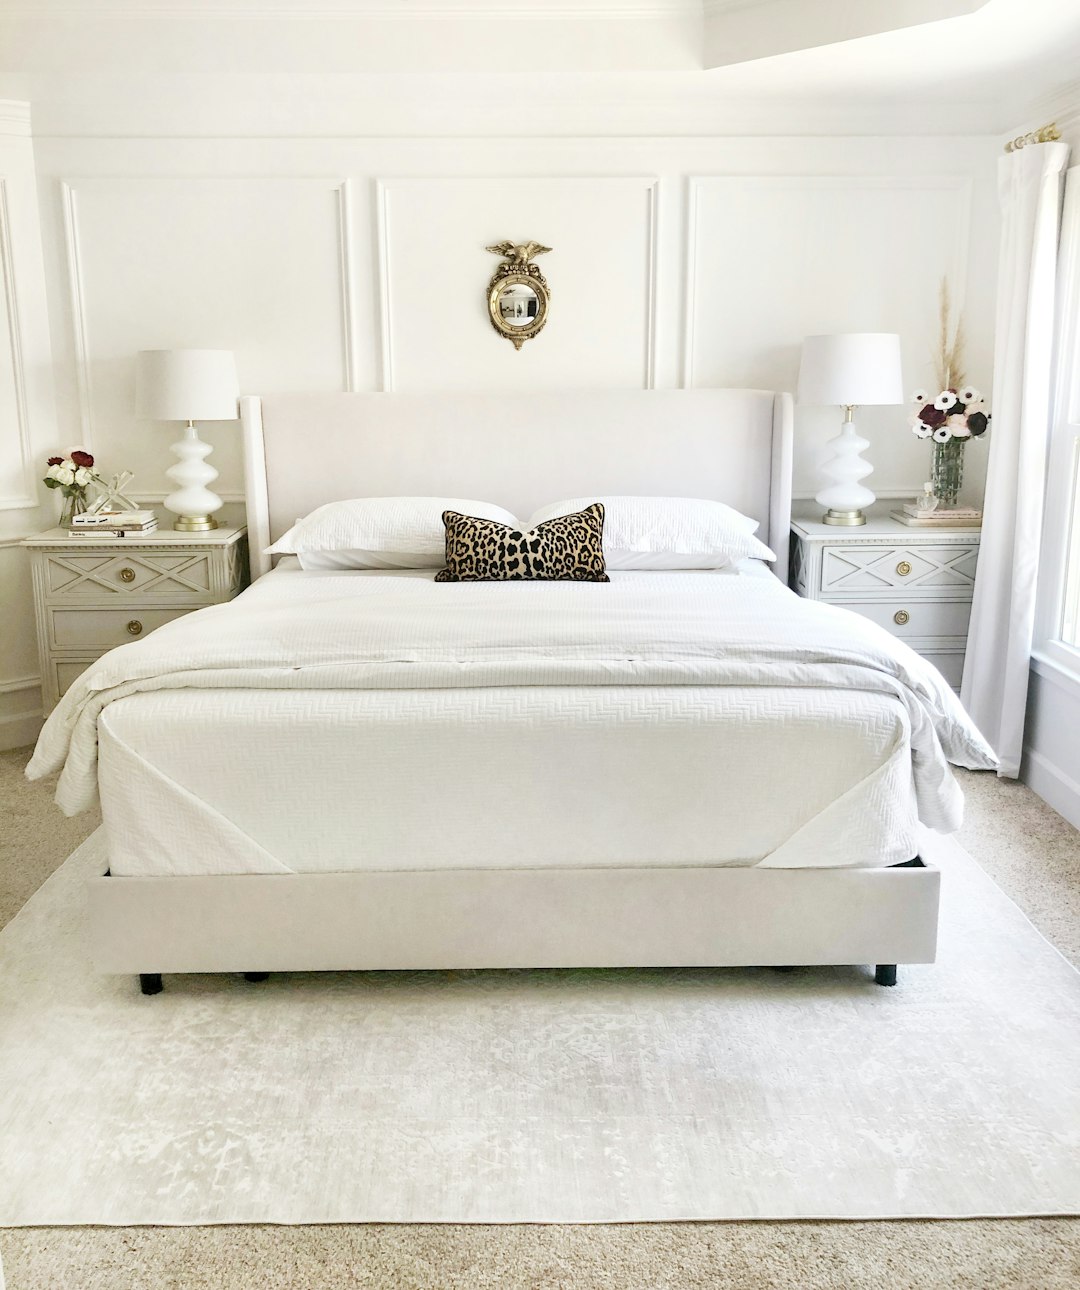  white bed with white bed linen bed